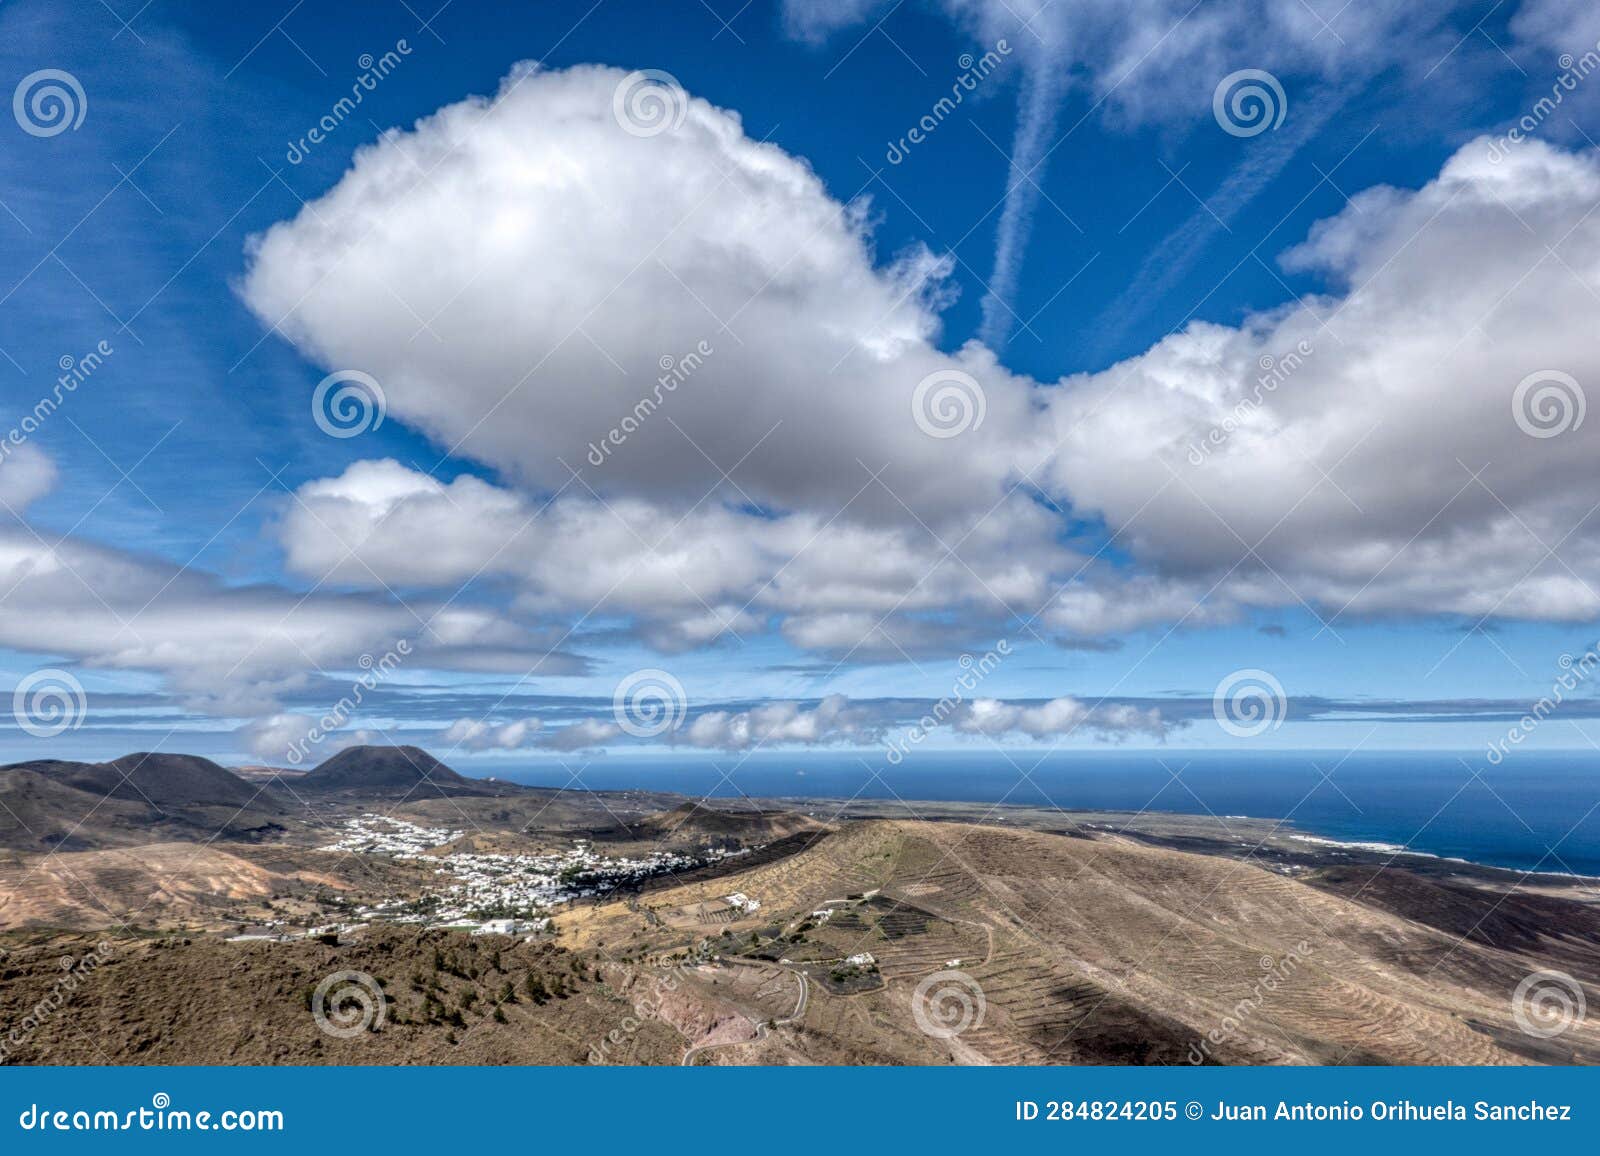 stunning views of the island of lanzarote, in the canary islands, from the viewpoint of los helechos